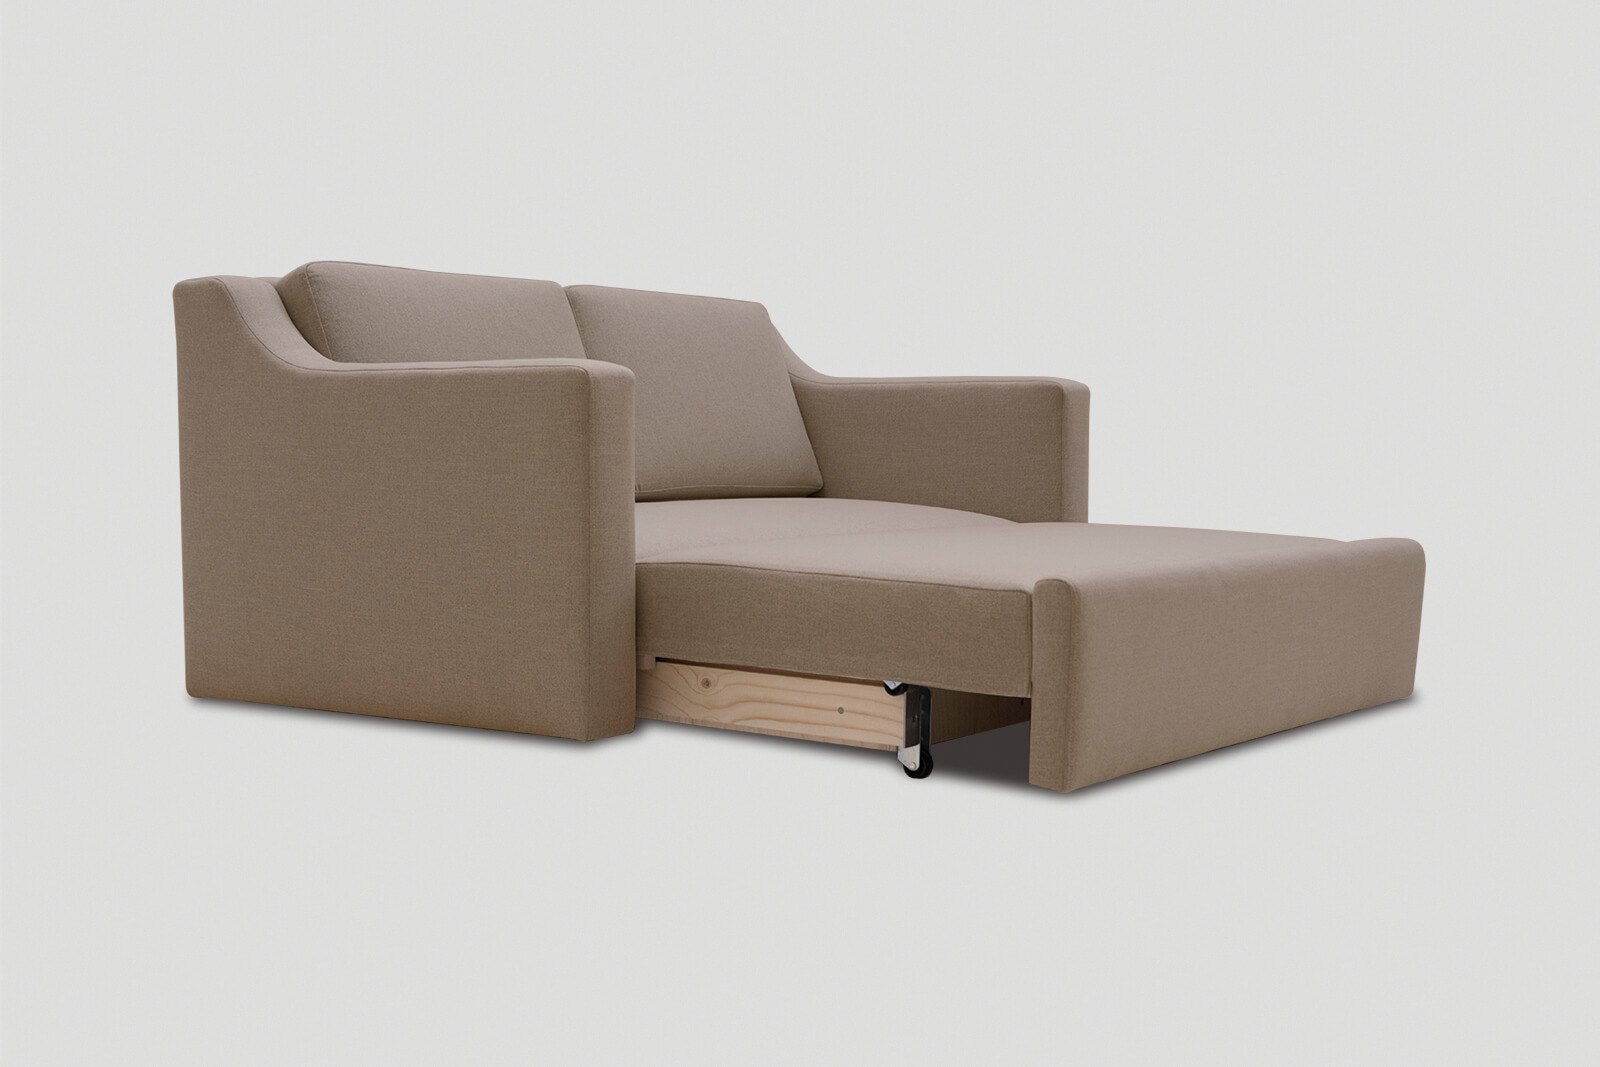 HBSB02-double-sofa-bed-husk-3q-daybed